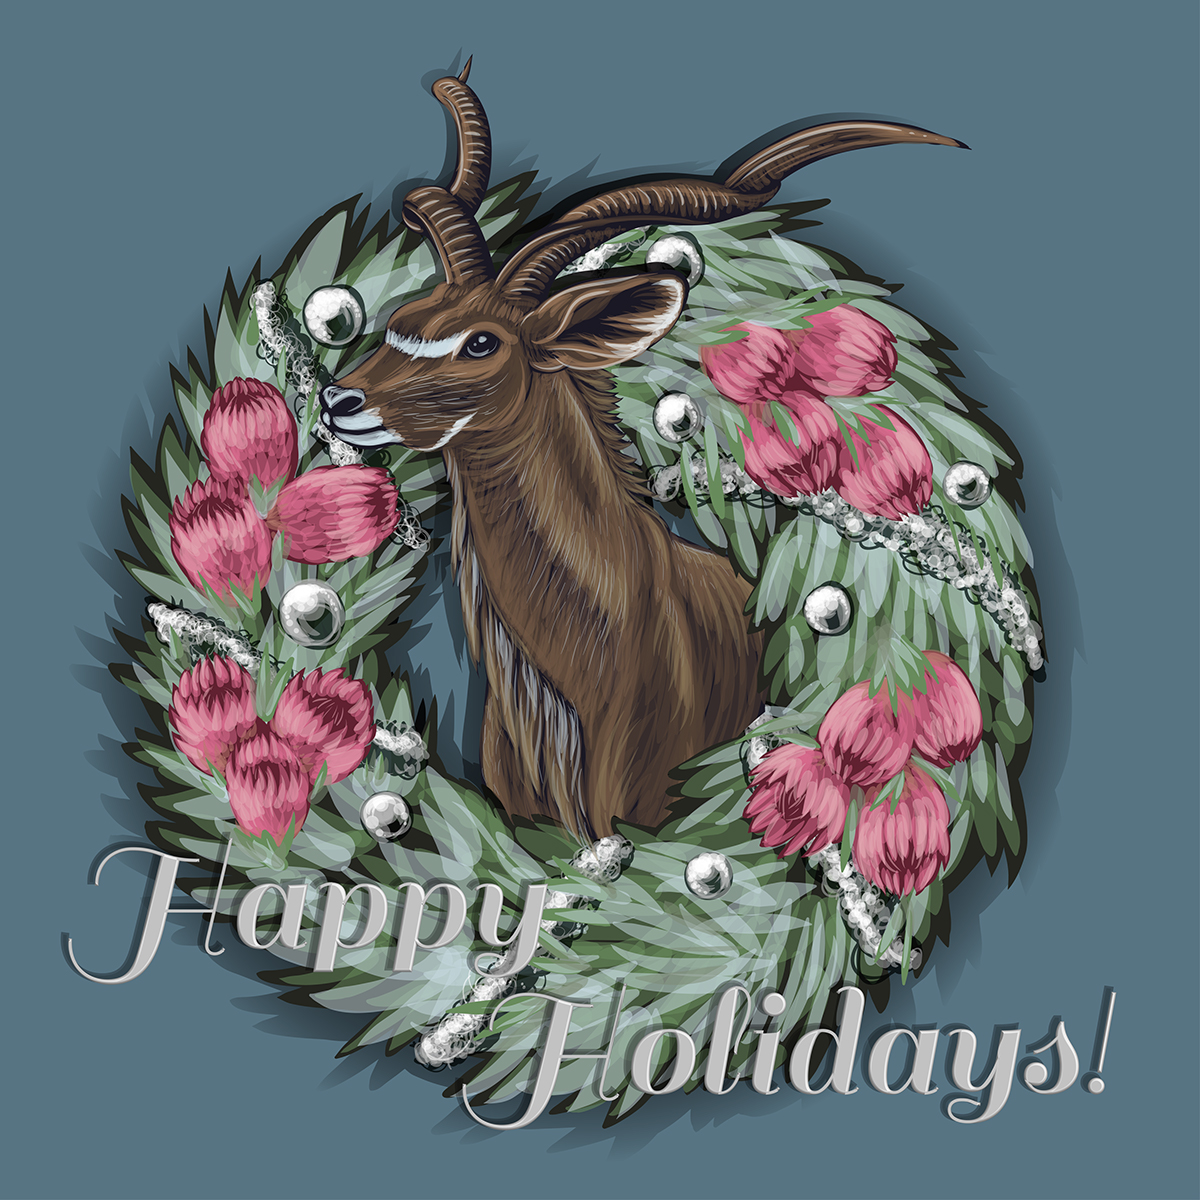 motion graphic holiday ecard adobe illustrator Adobe Photoshop Adobe Aftereffects Kudu protea south africa Christmas